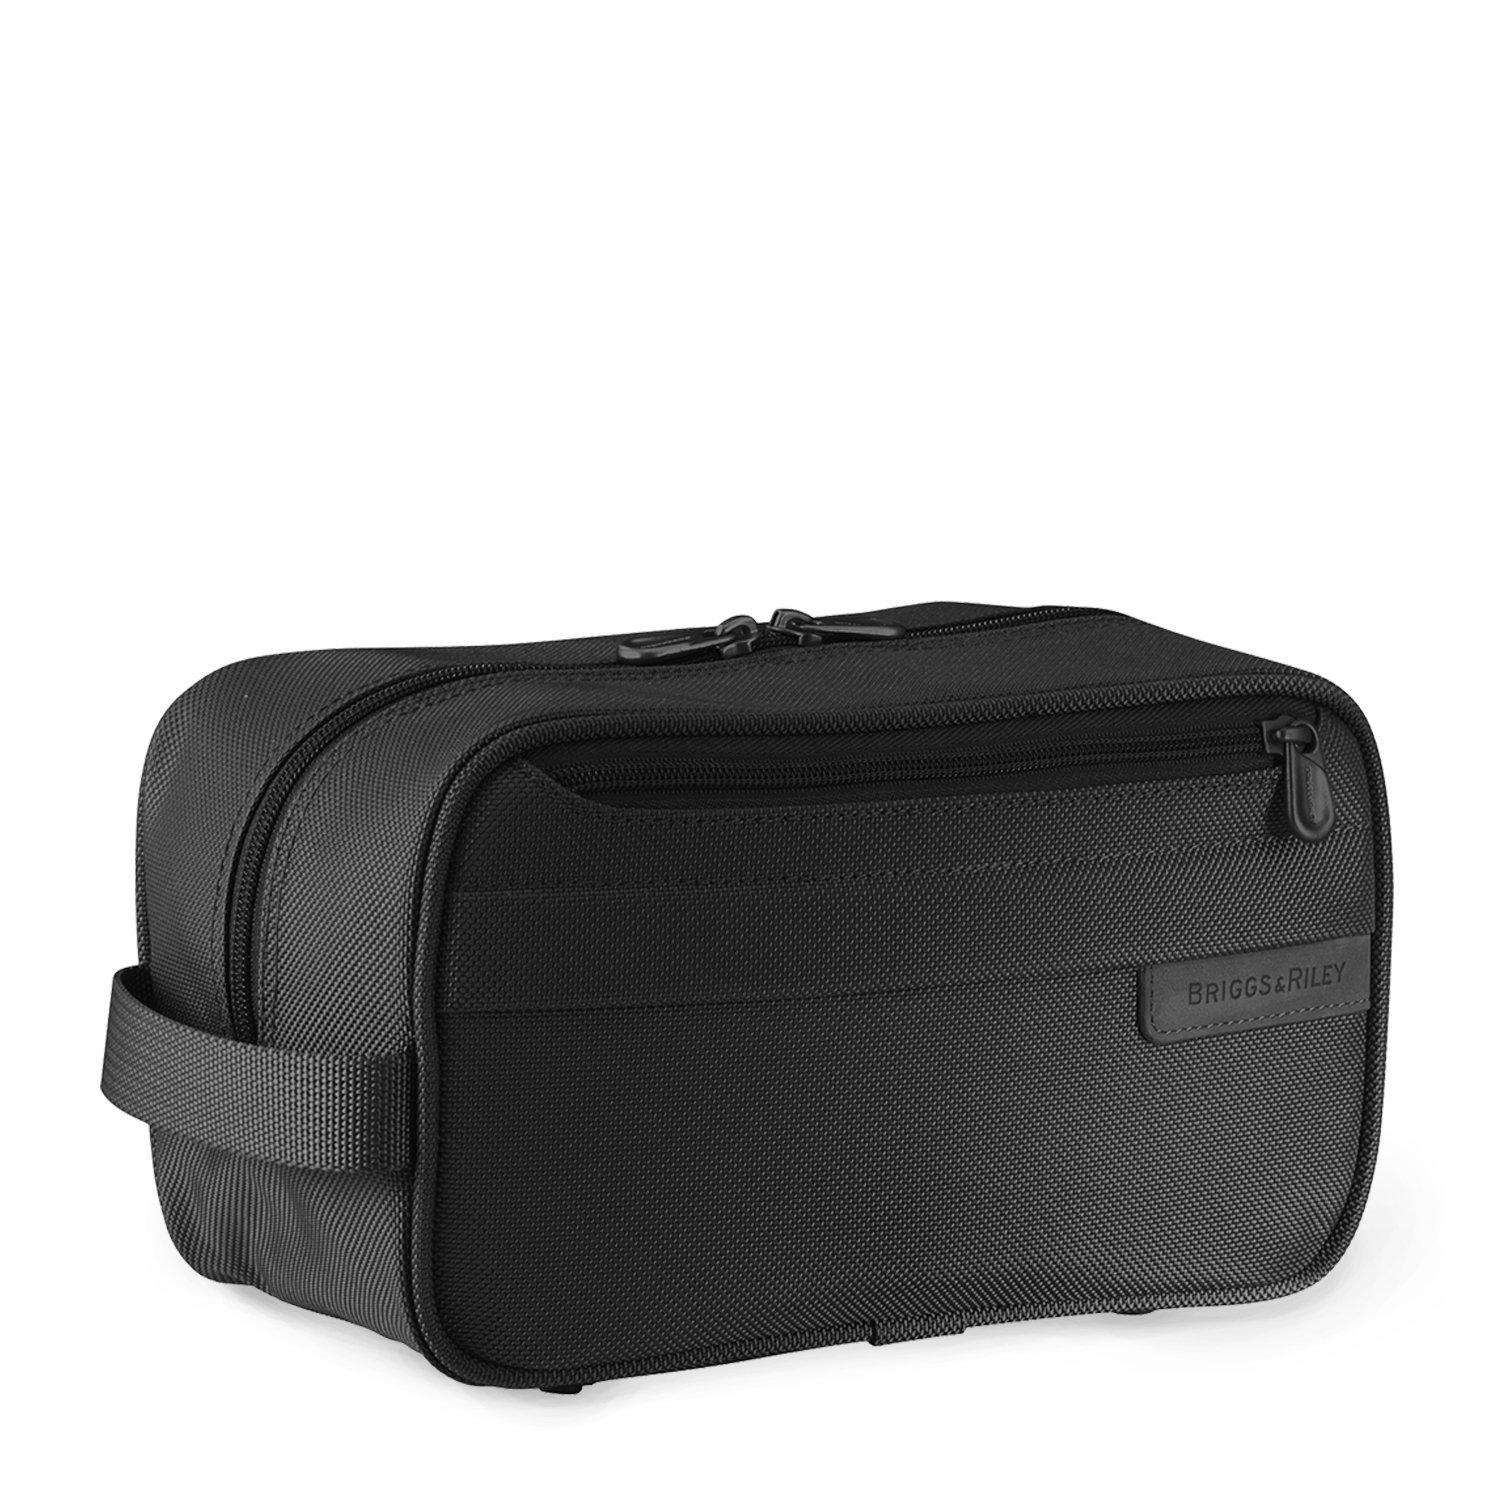 Briggs & Riley – Classic Toiletry Kit – Way to Go | Travel store in ...